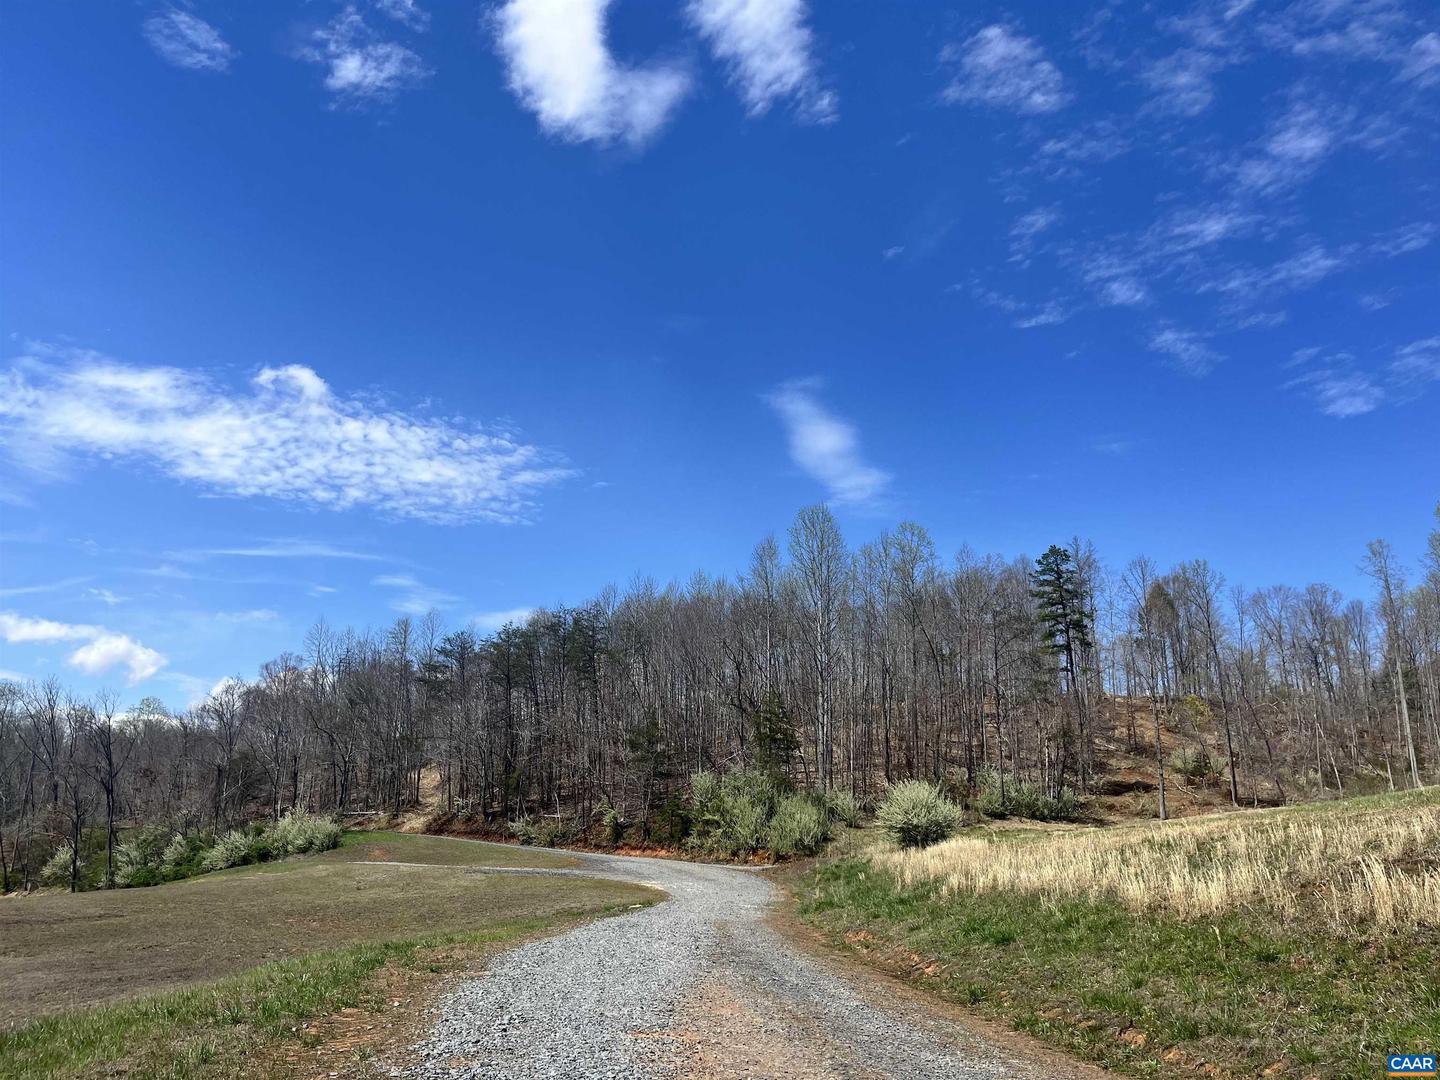 0 WILLOW BRANCH LN #2, FABER, Virginia 22938, ,Land,For sale,0 WILLOW BRANCH LN #2,649236 MLS # 649236